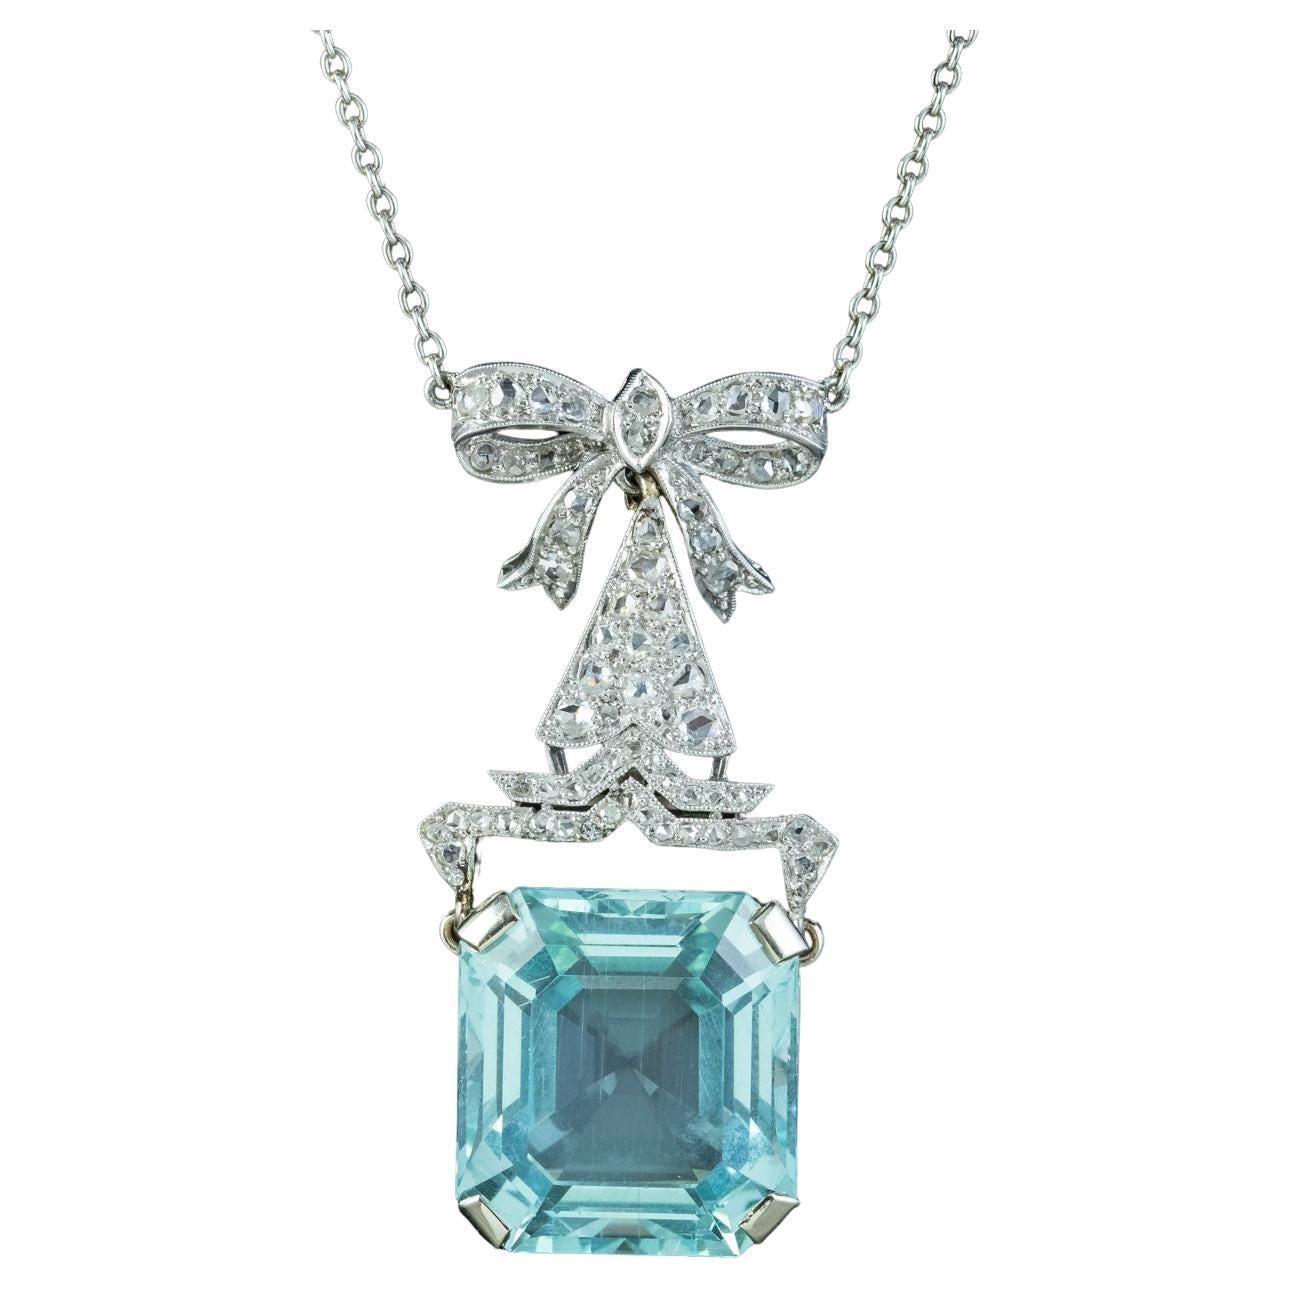 A stunning antique Art Deco lavaliere necklace from the early 1900s boasting a magnificent emerald cut aquamarine at the bottom weighing an impressive 30 carats (approx.) It has a desirable glacier-blue/ green hue and swings freely from a fabulous